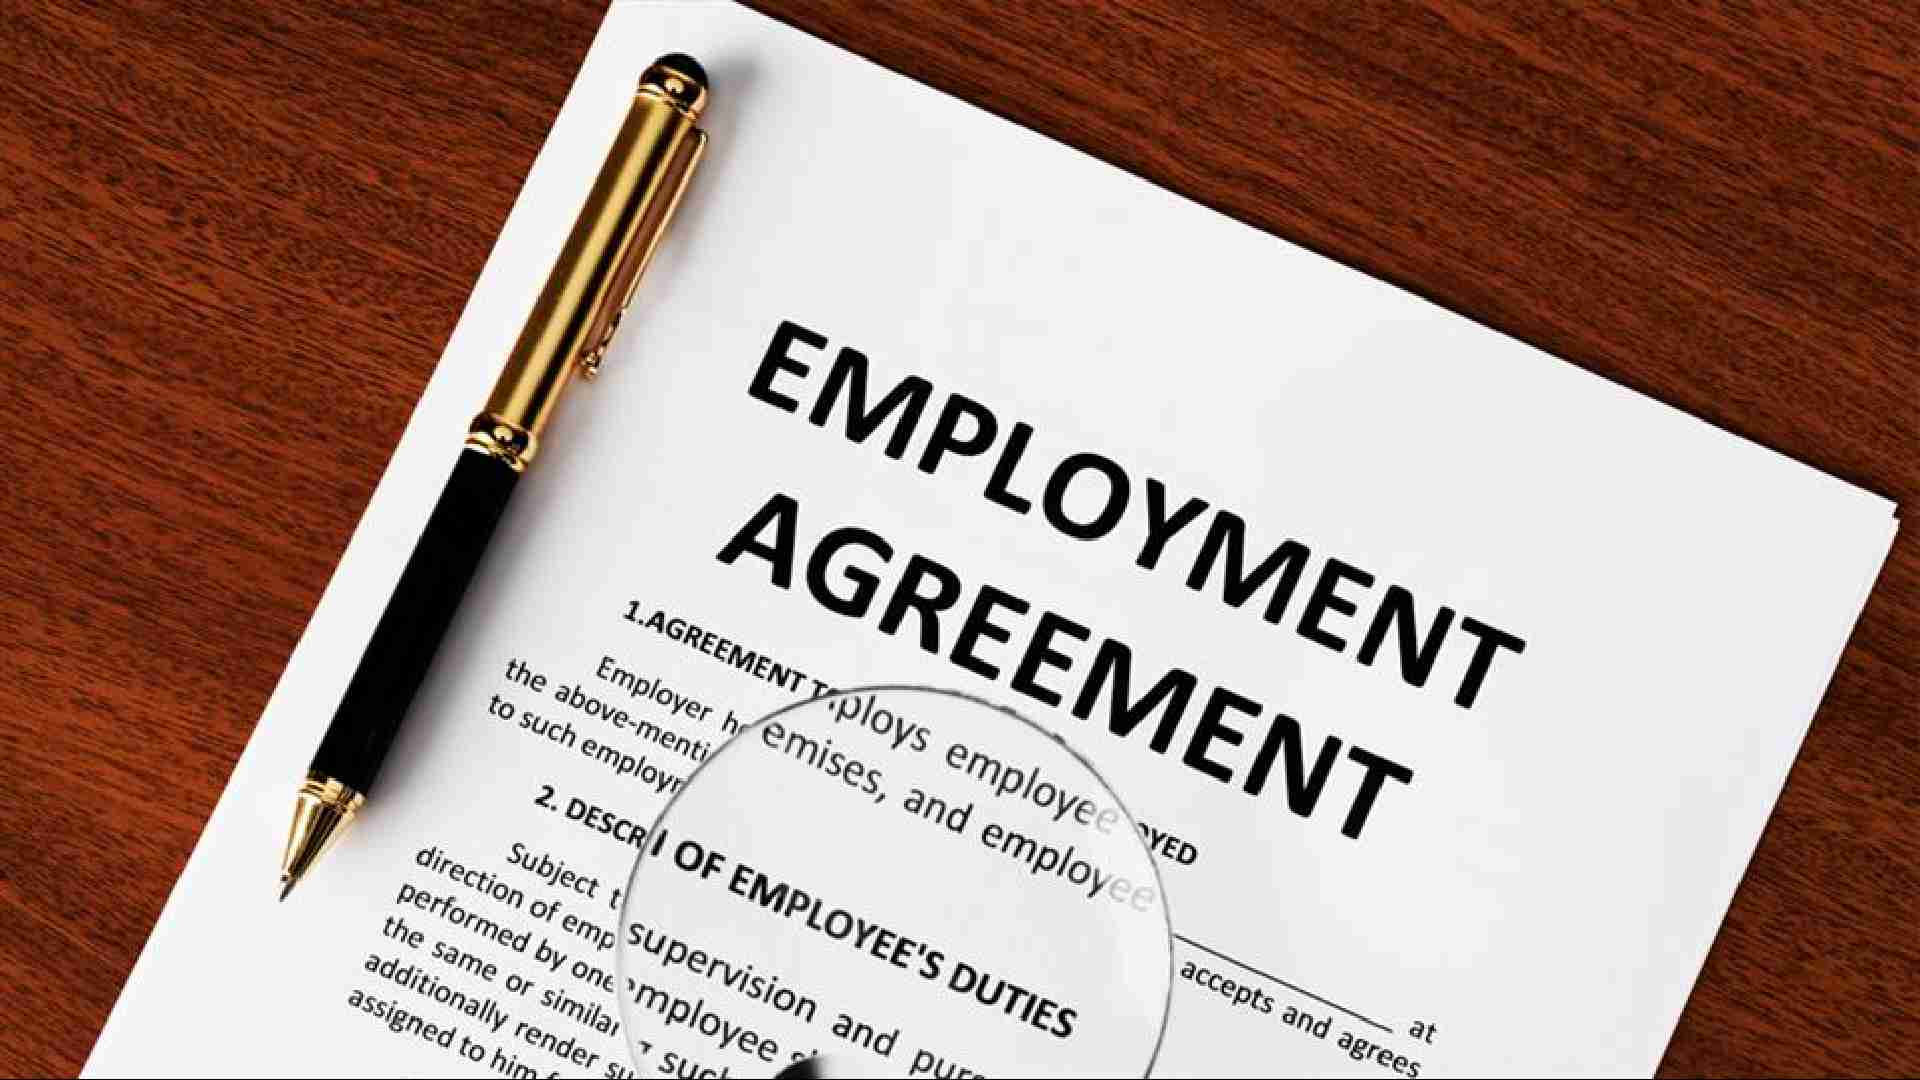 employment contract in UAE